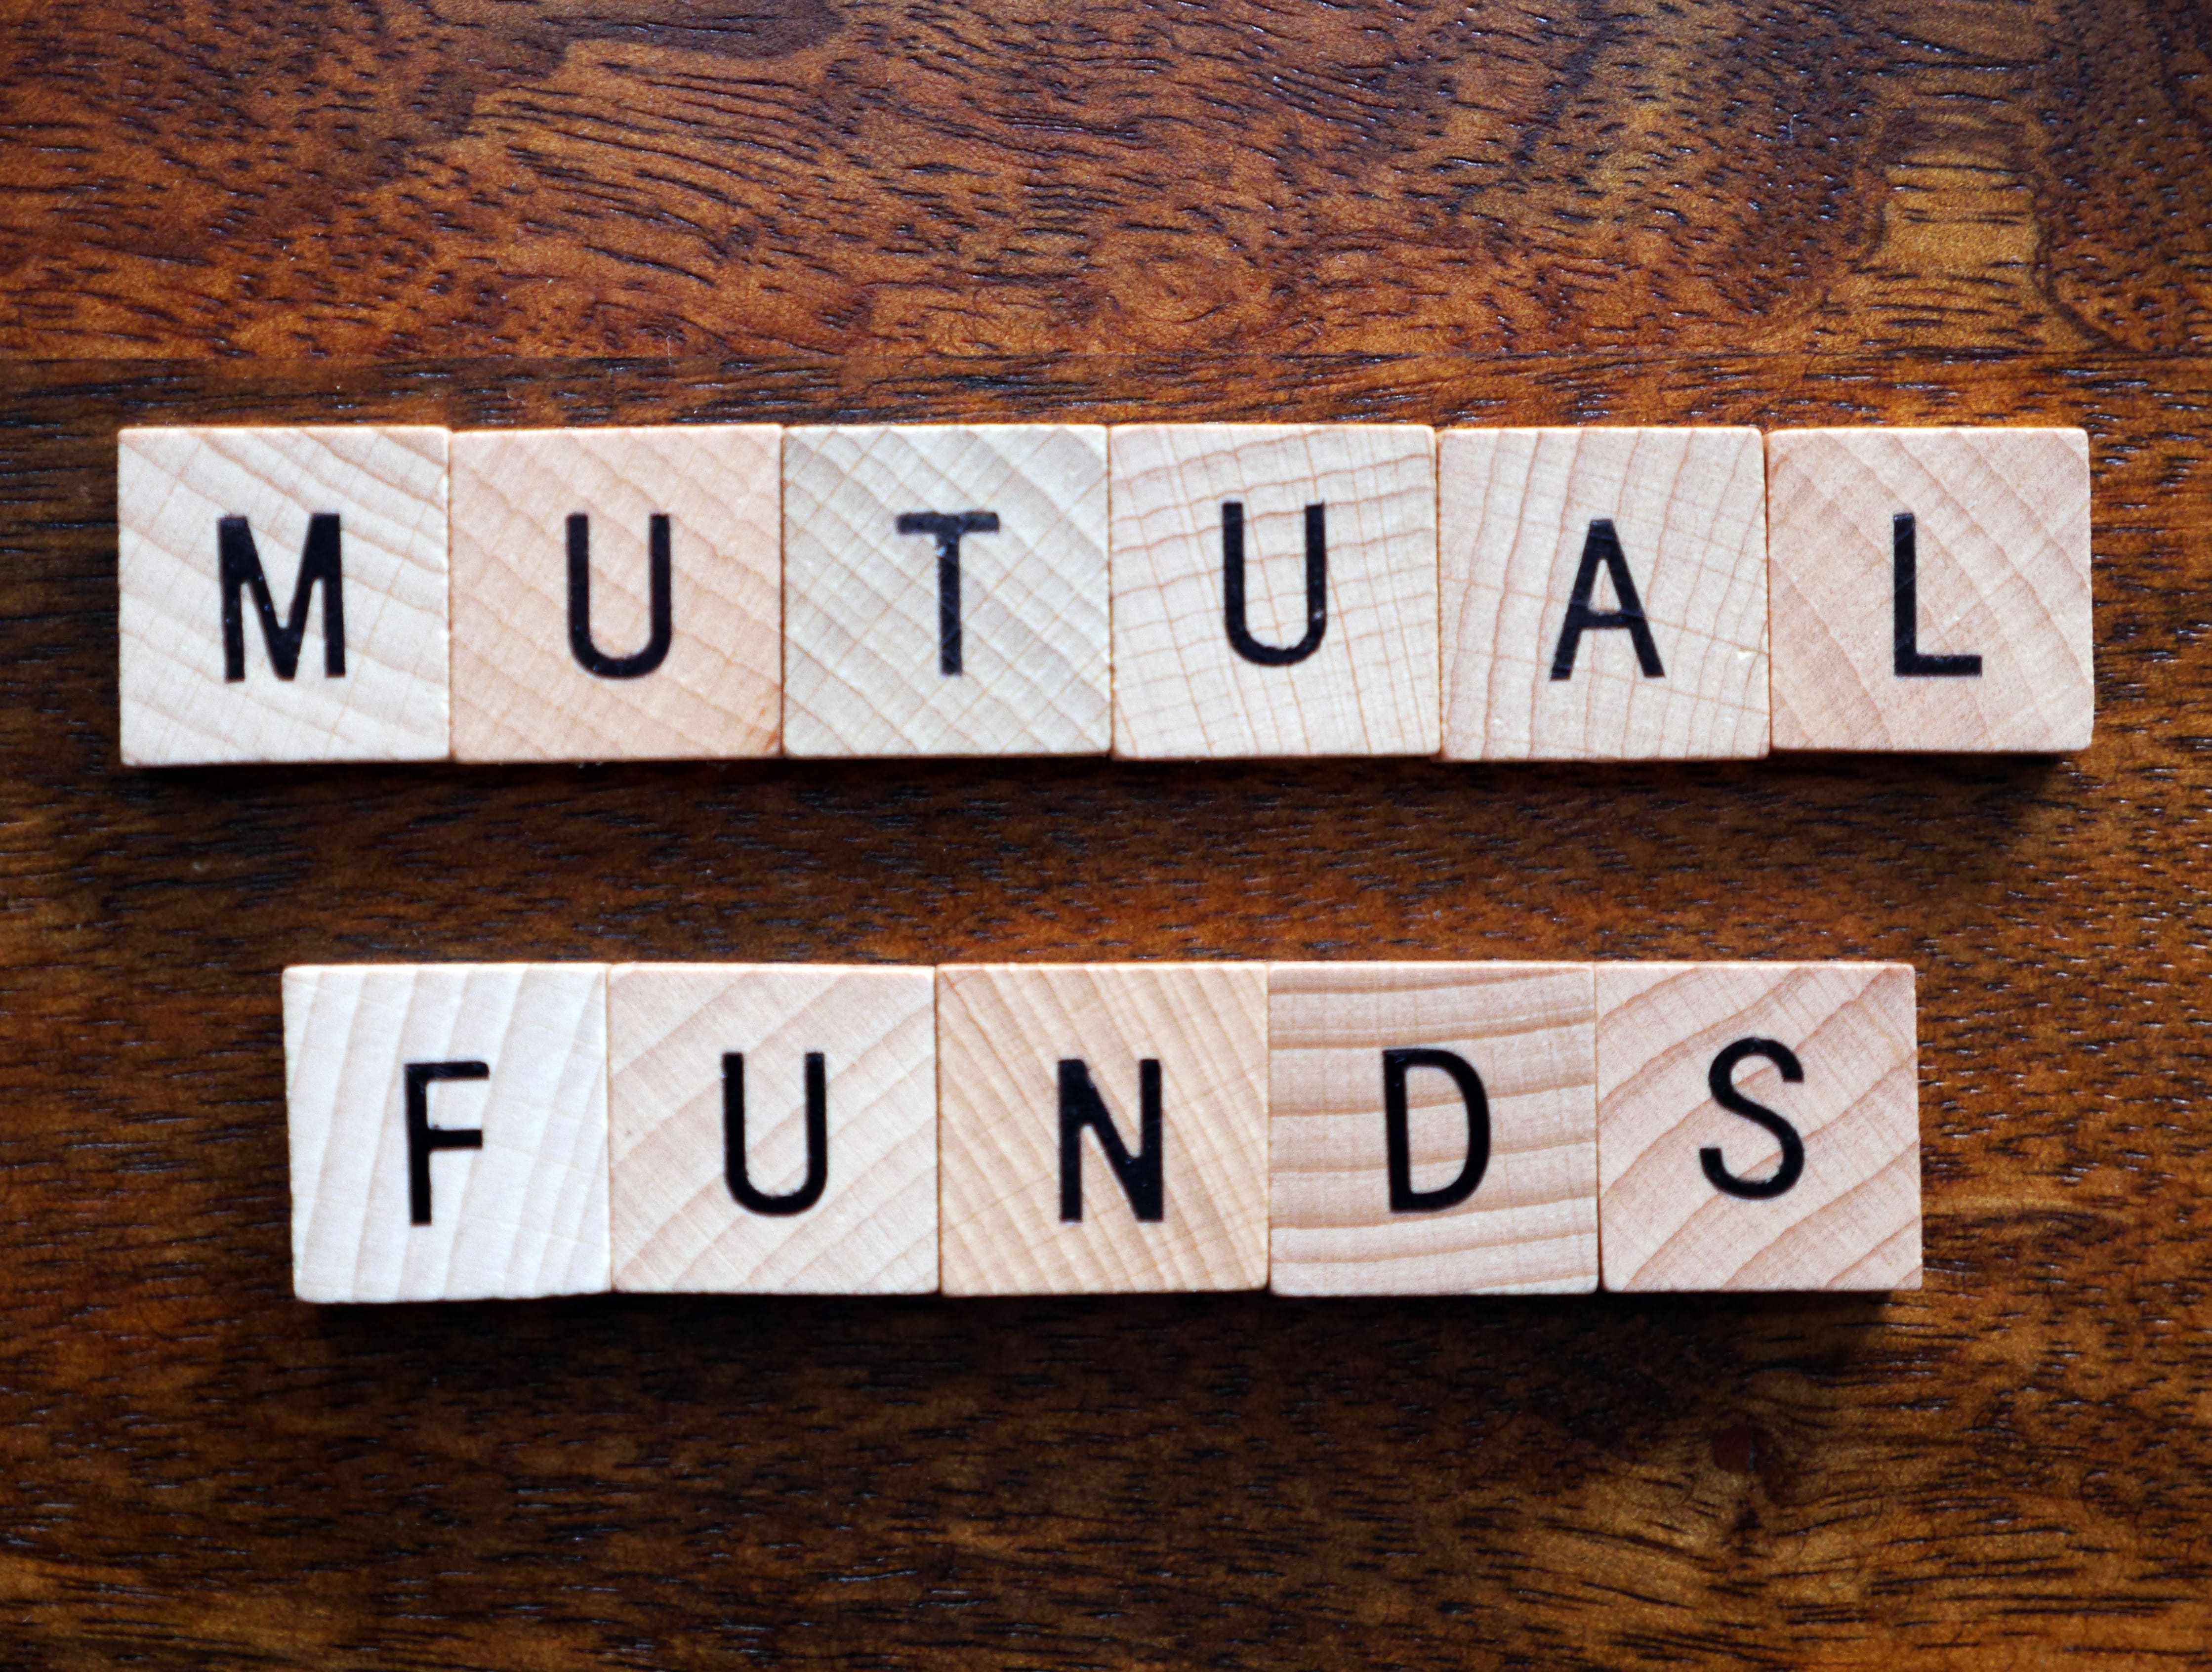 Points to Be Noted While Comparing Mutual Funds